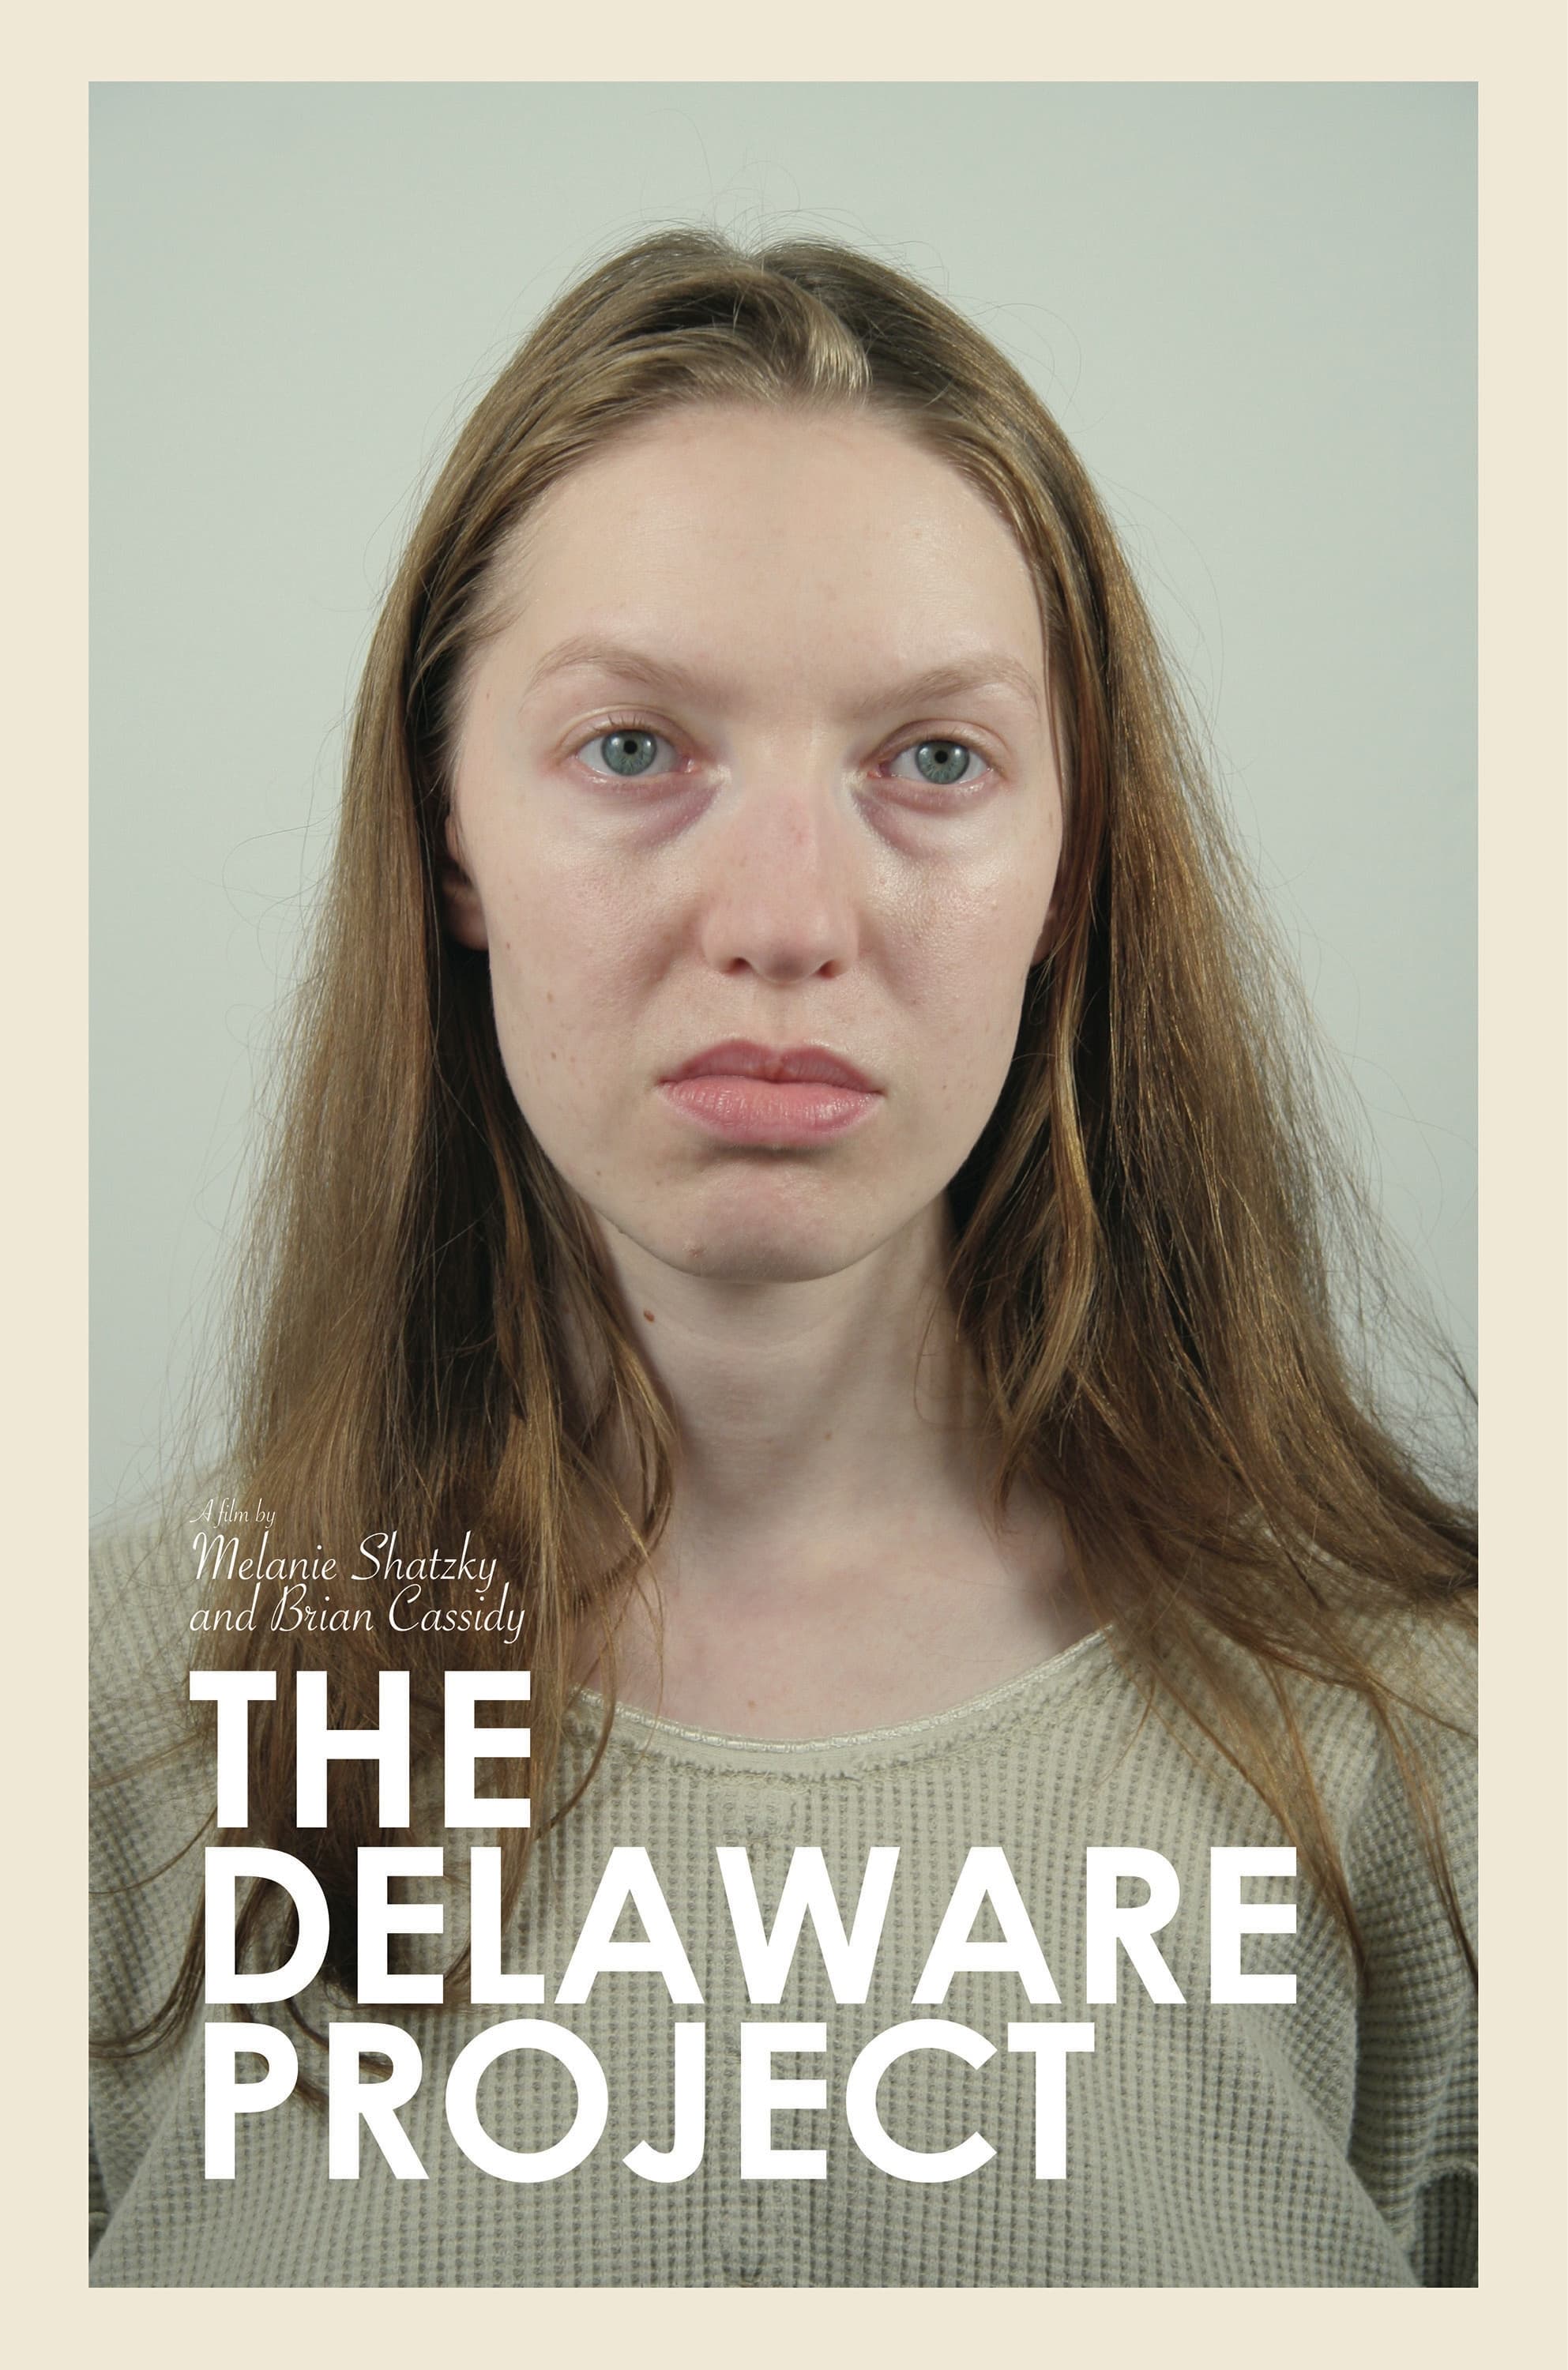 The Delaware Project